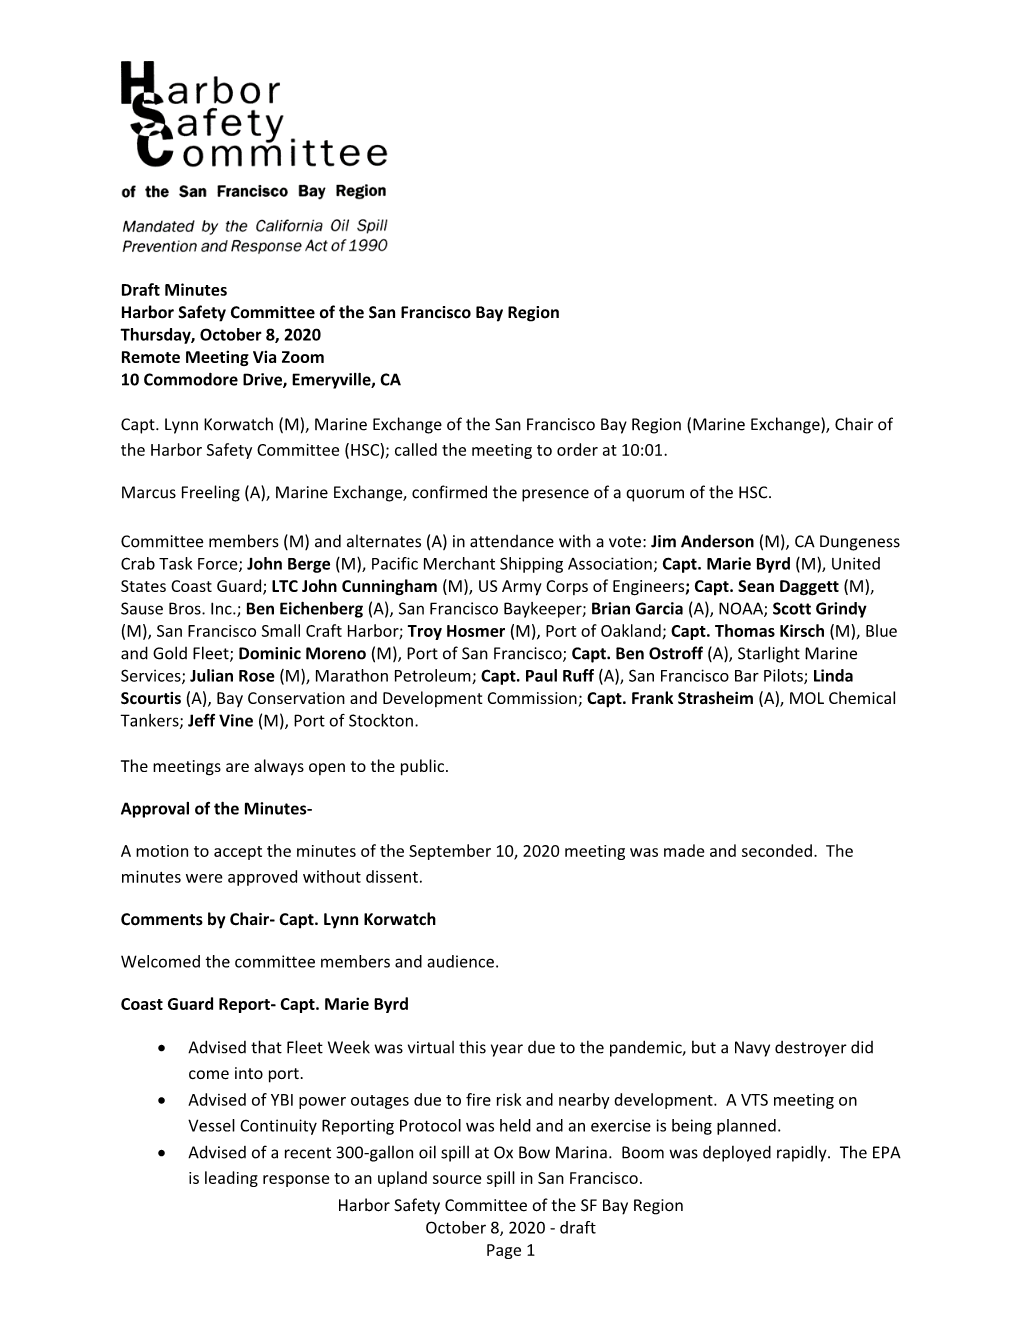 Harbor Safety Committee of the SF Bay Region October 8, 2020 - Draft Page 1